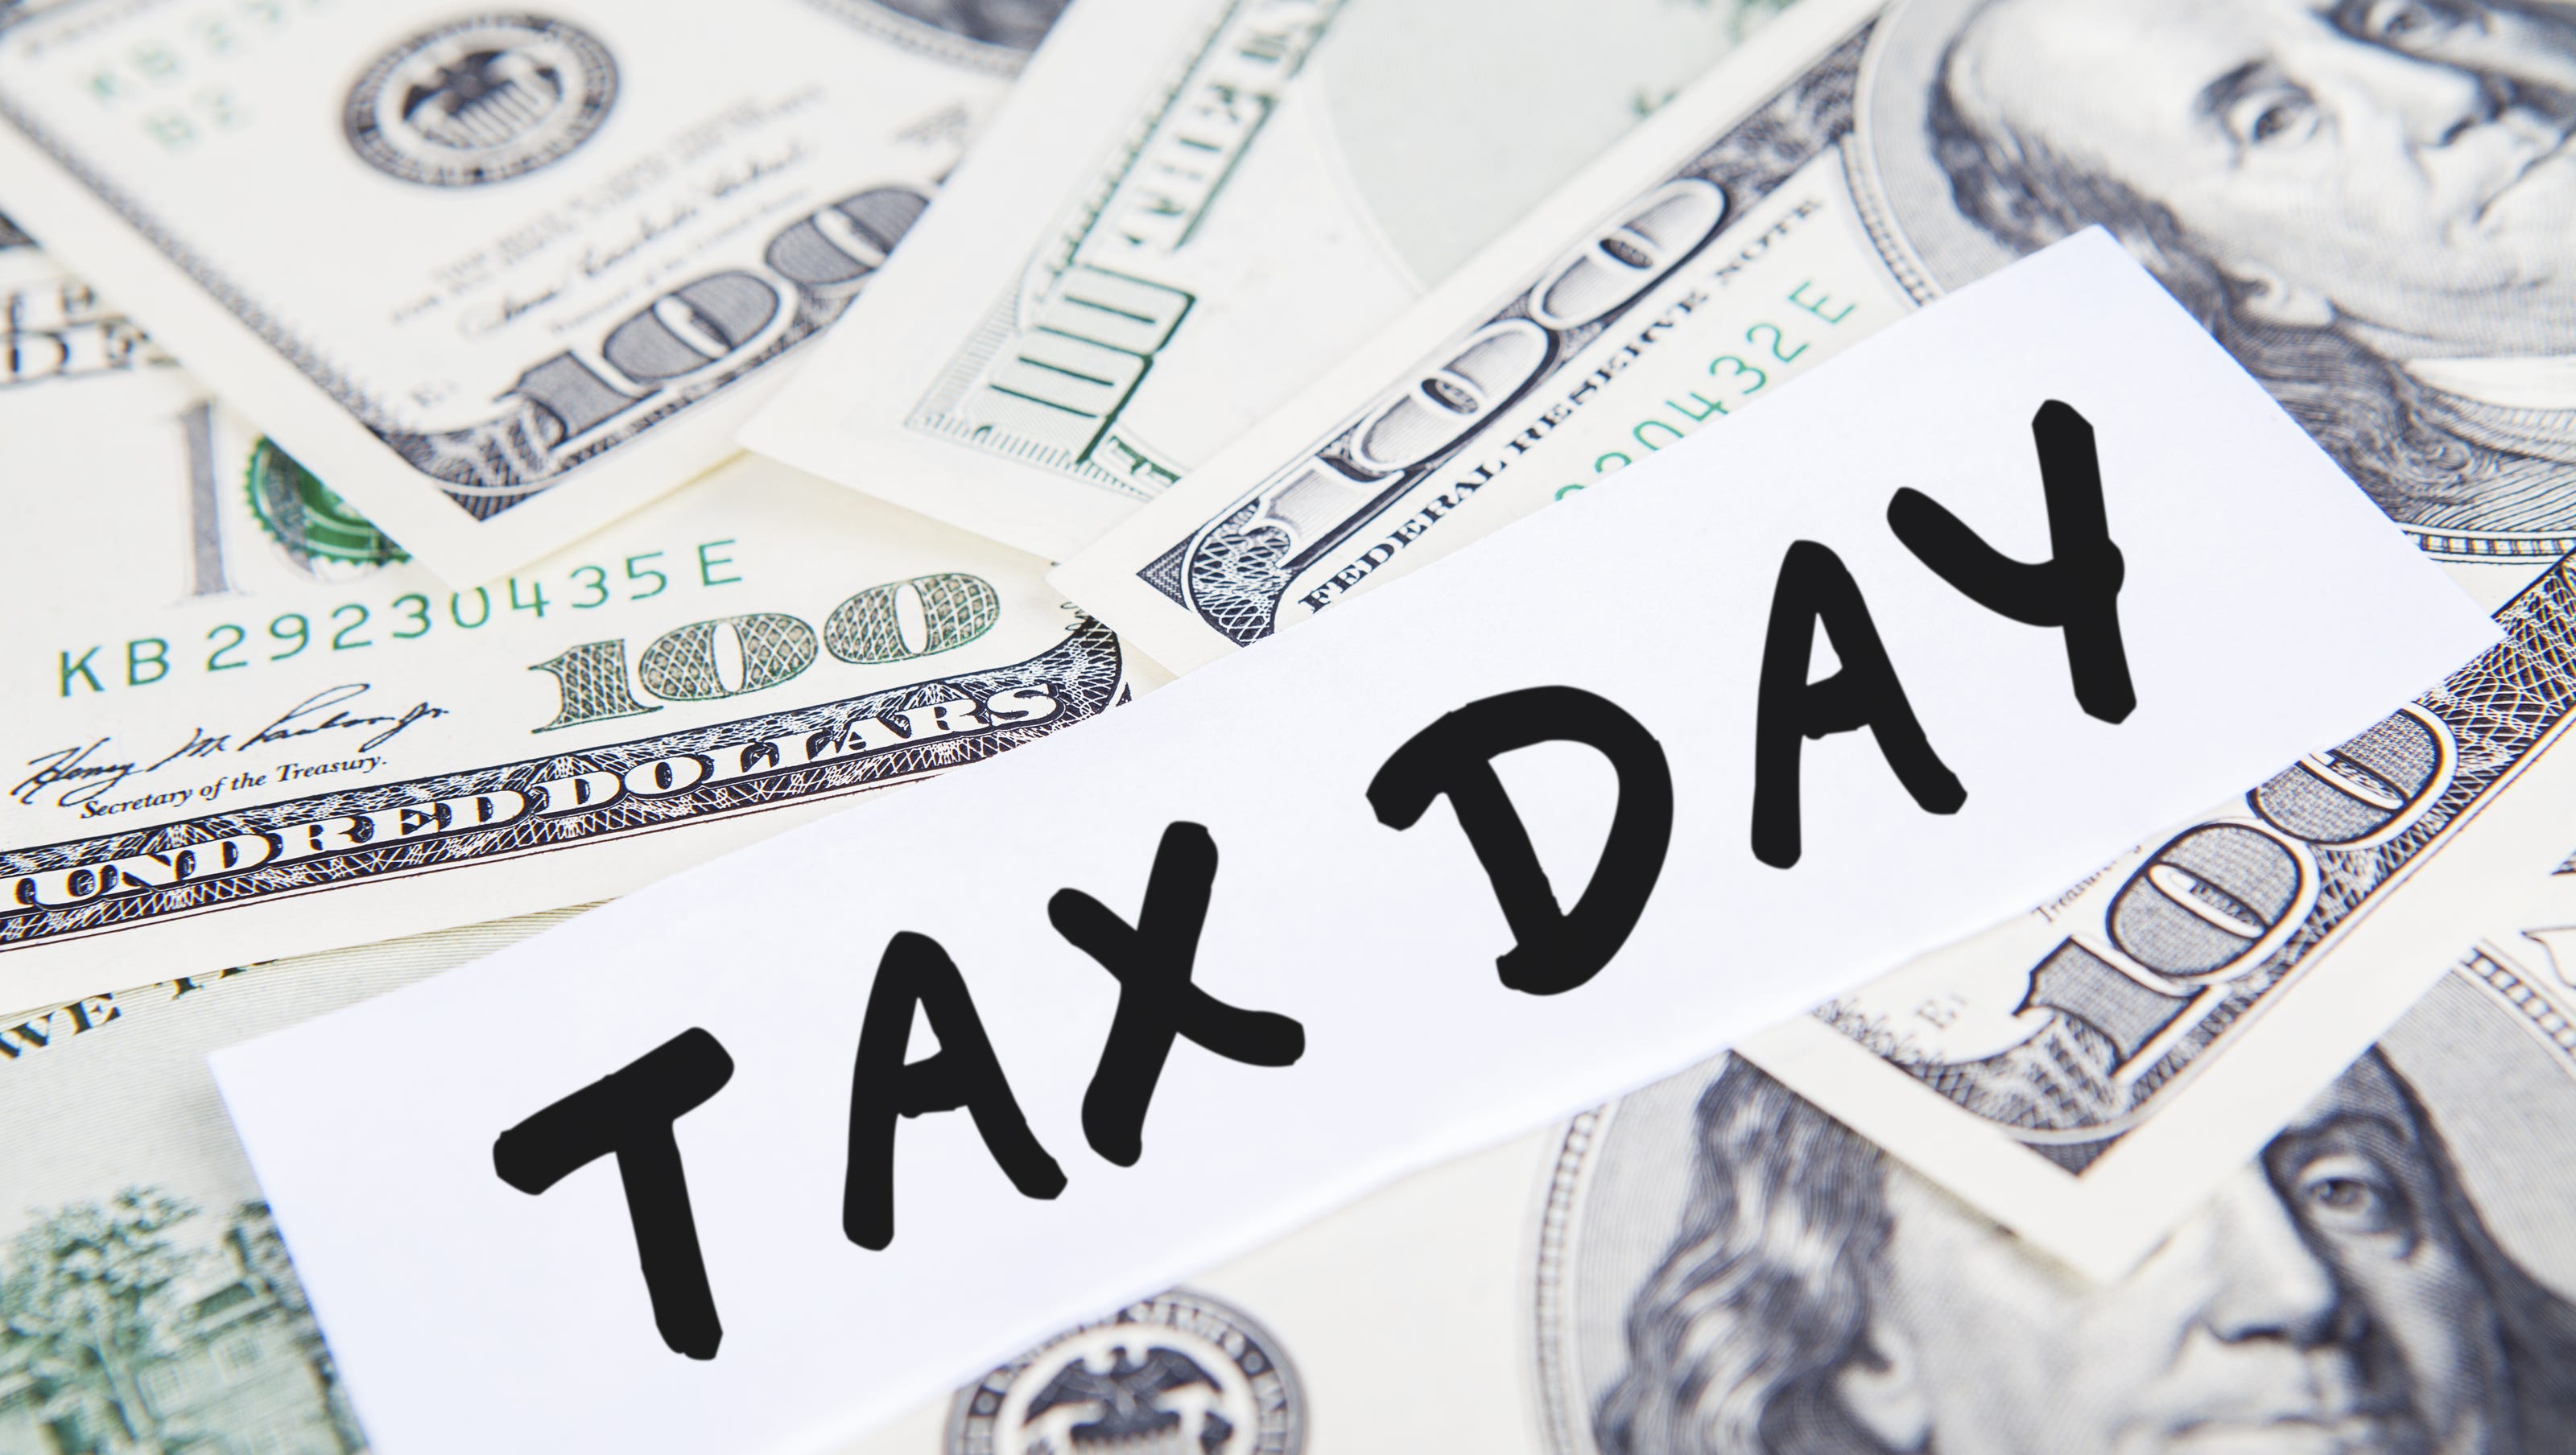 Tax Day is on April 18 this year, not April 15